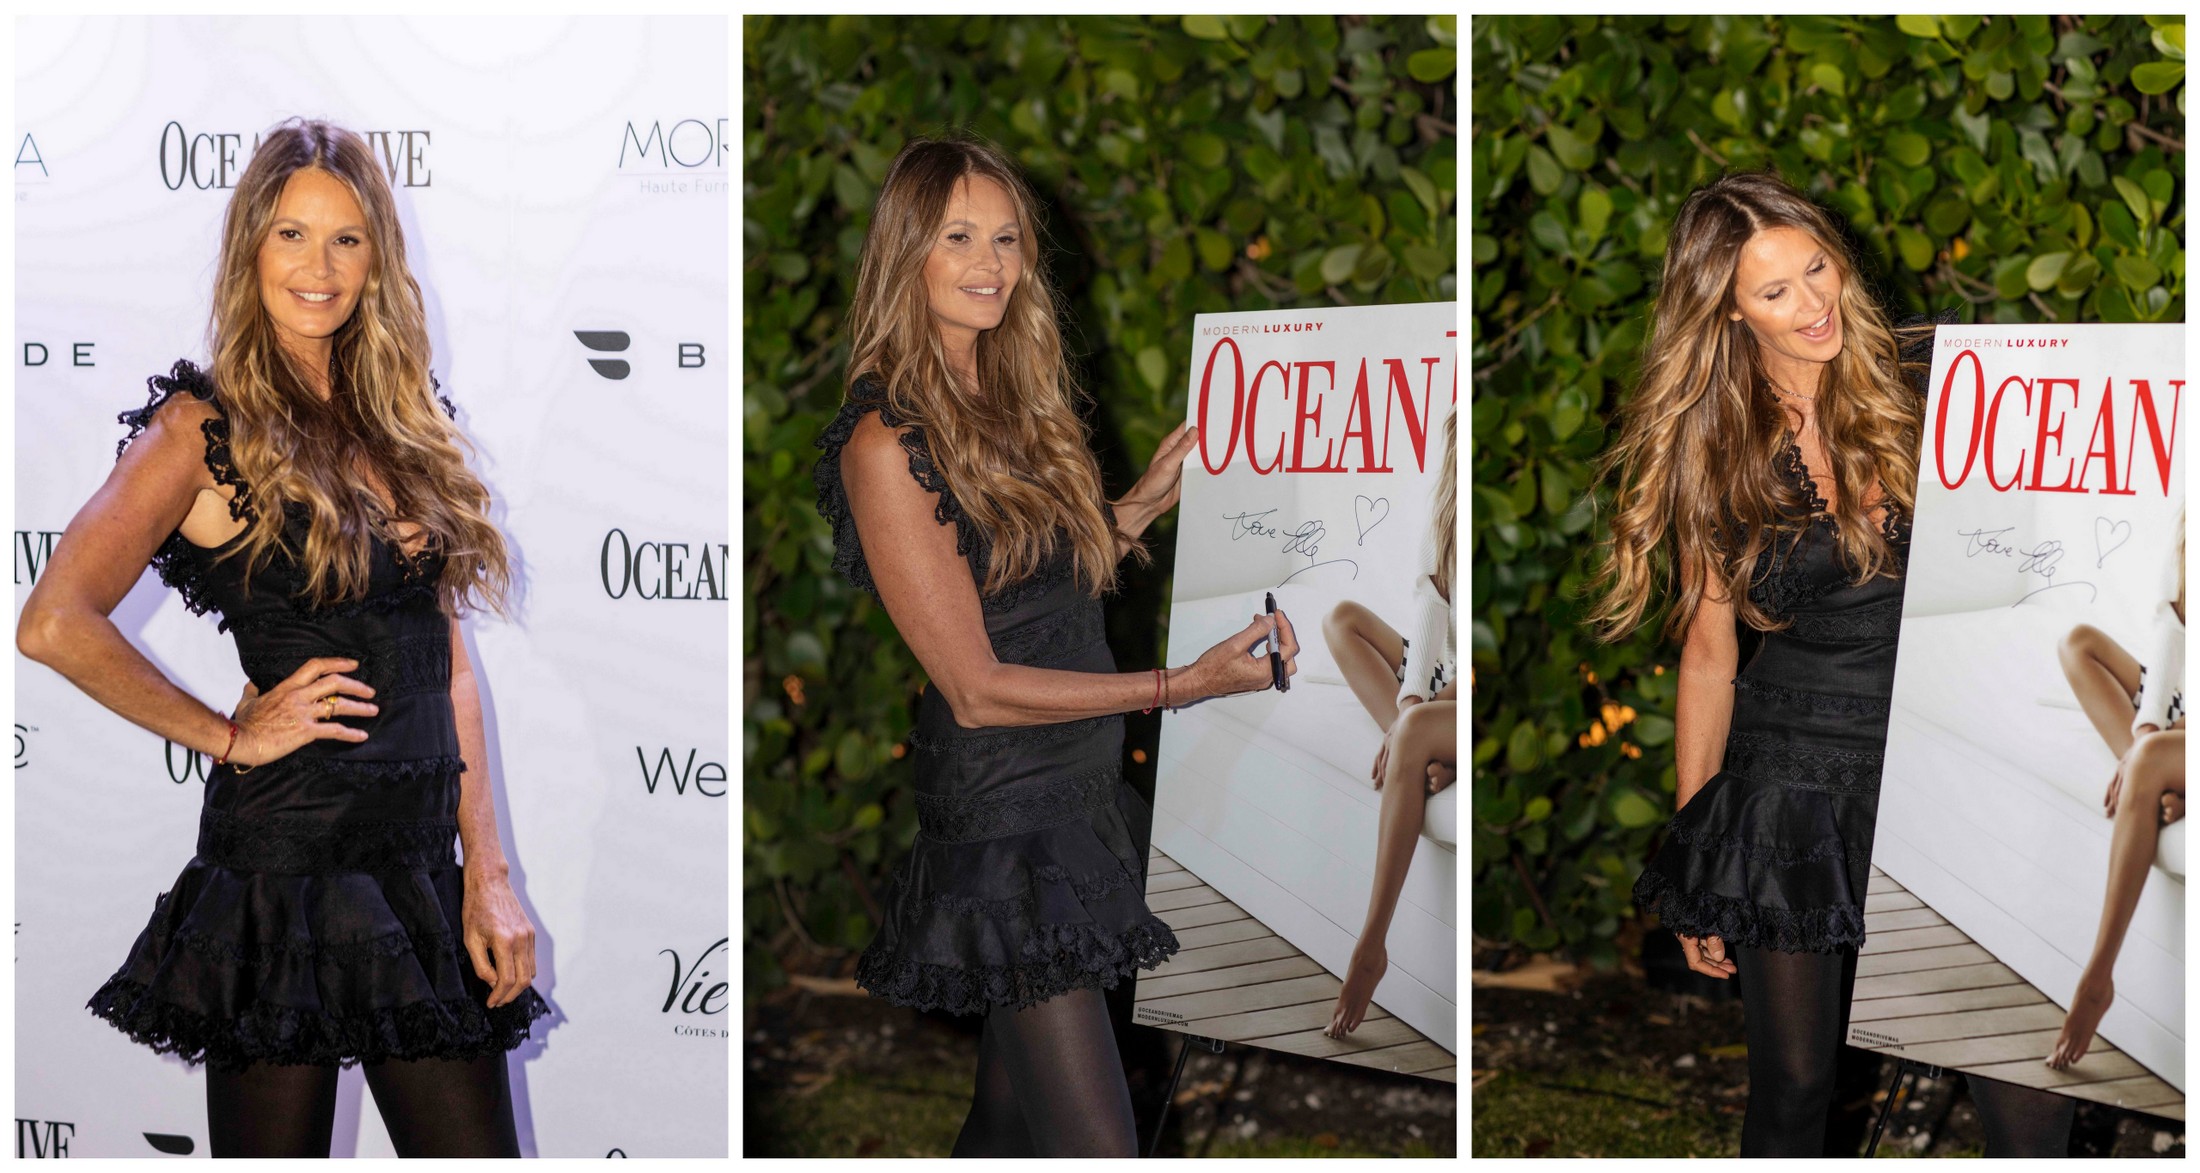 Ocean Drive Magazine celebrates its first issue of 2019 with a VIP event hosted by its cover star Elle Macpherson